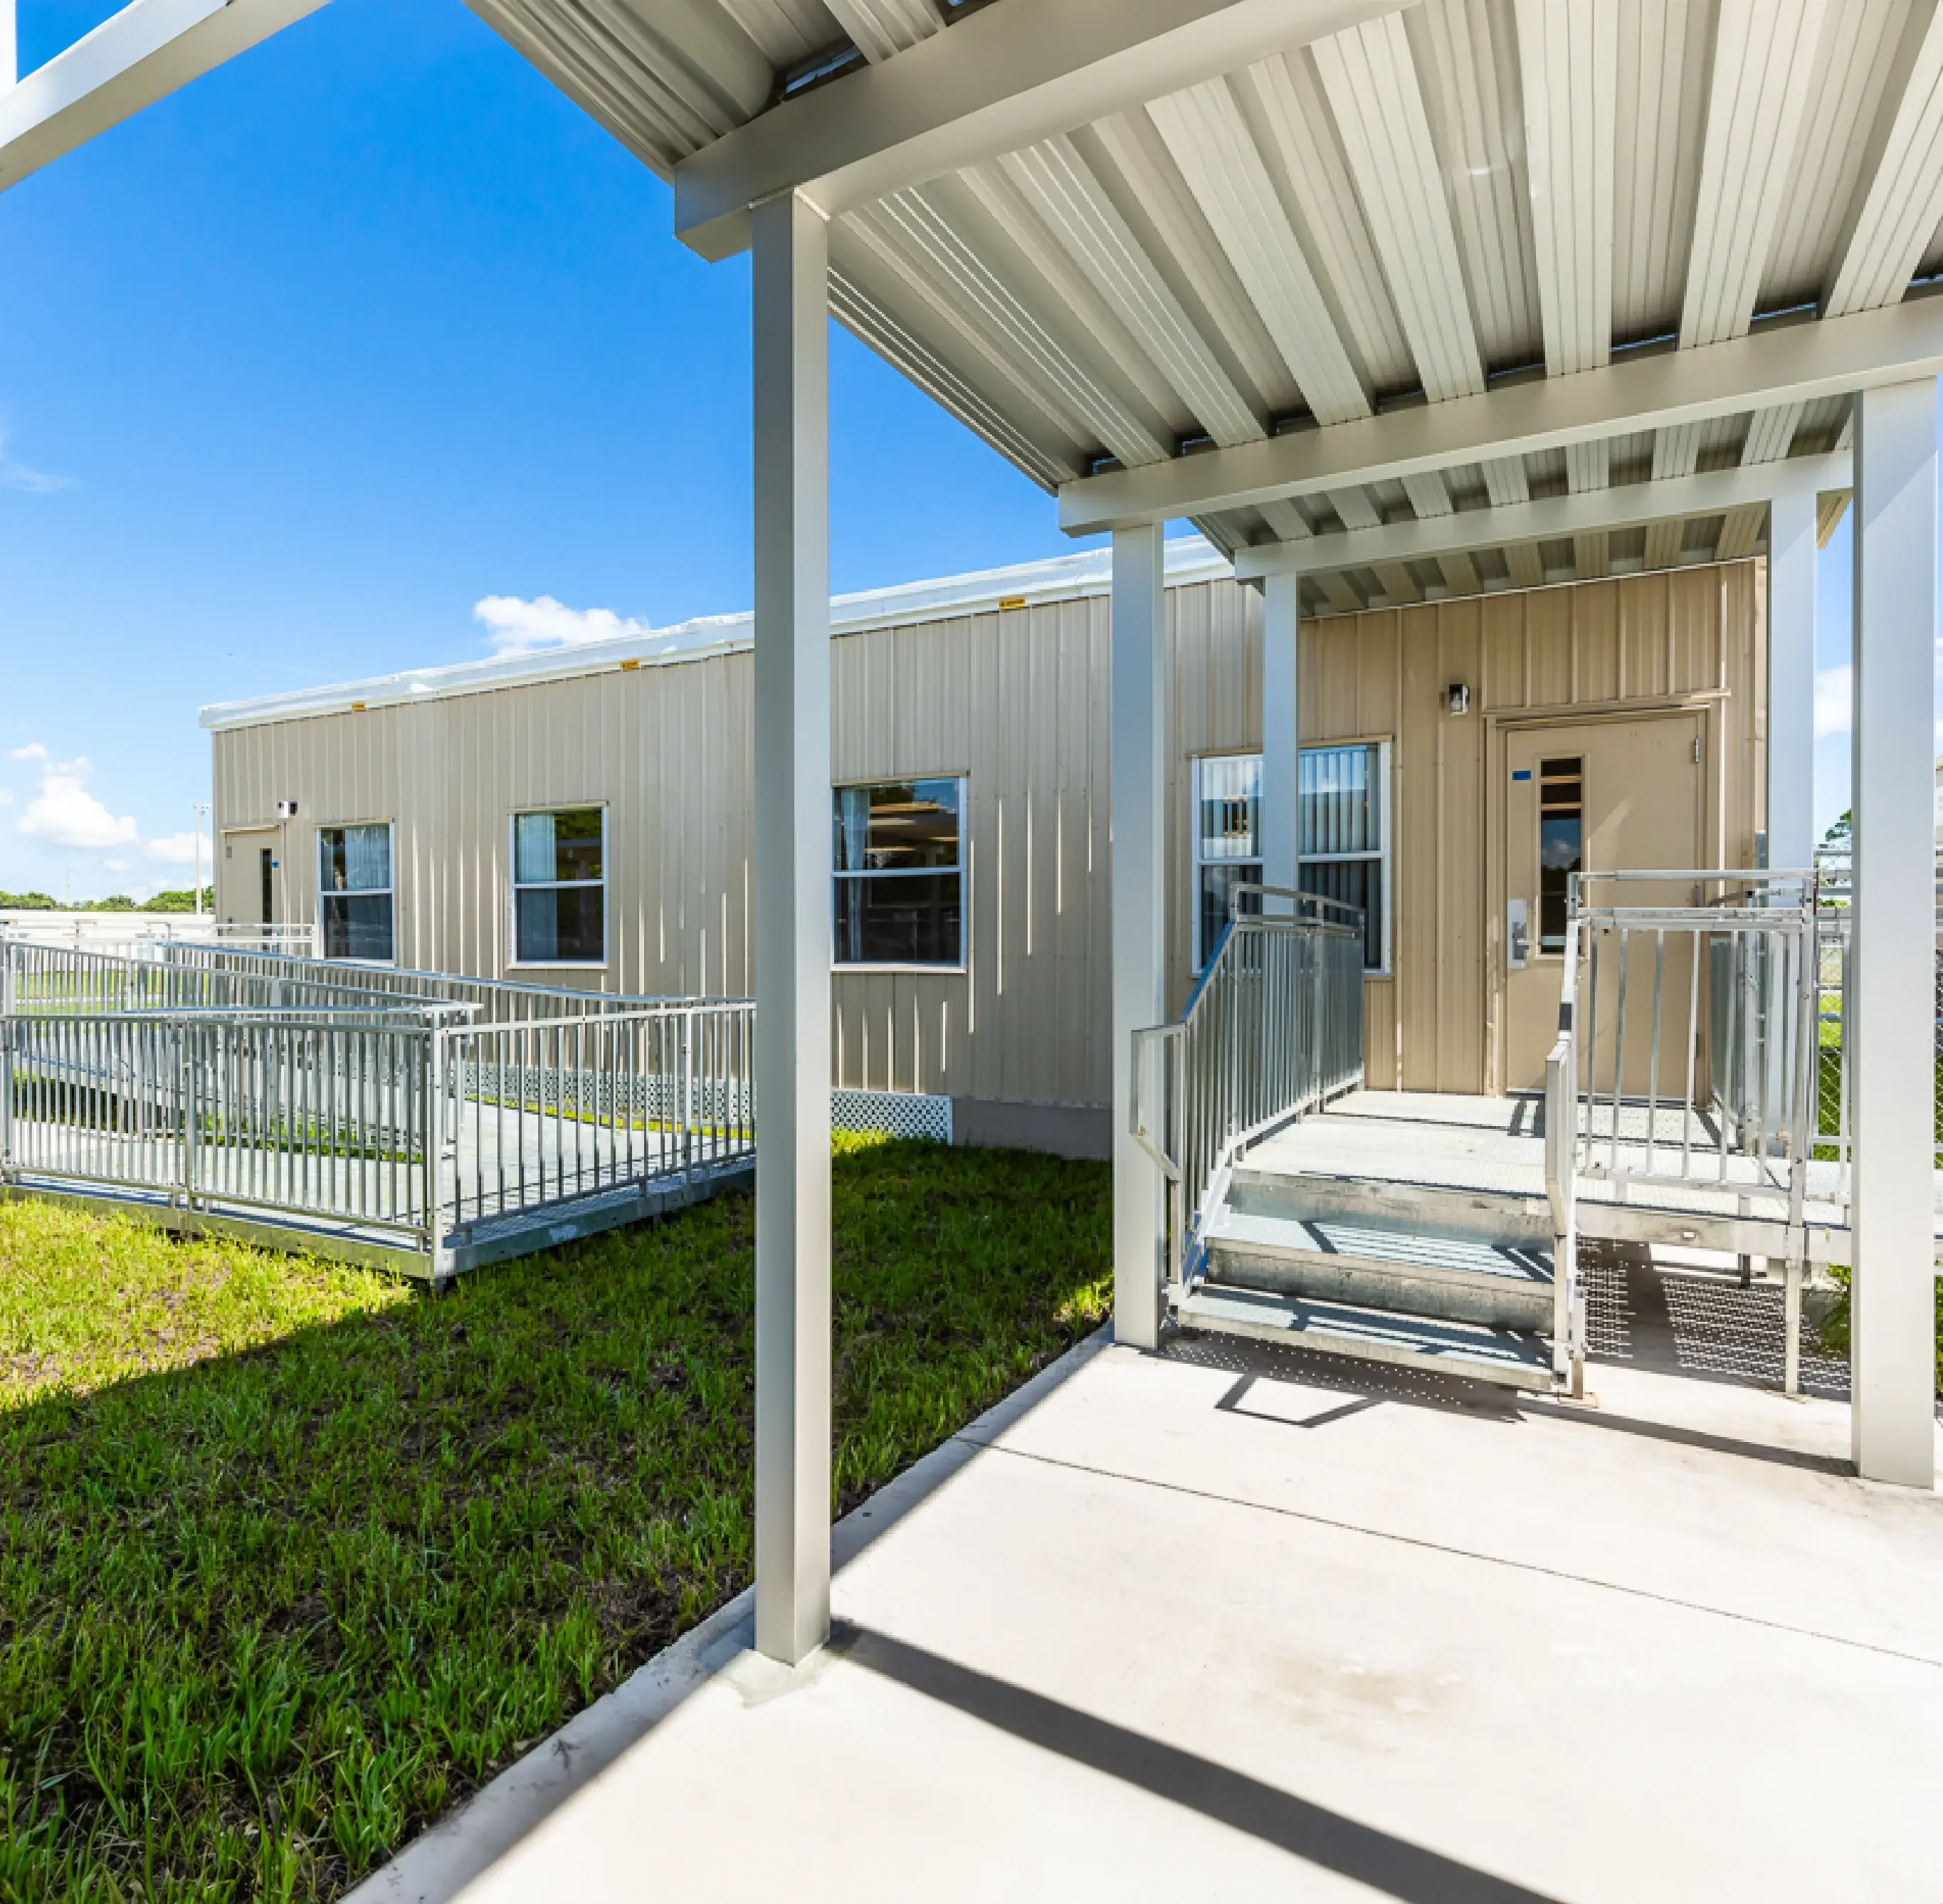 Rent, Lease or Purchase Modular Classroom Building Solutions